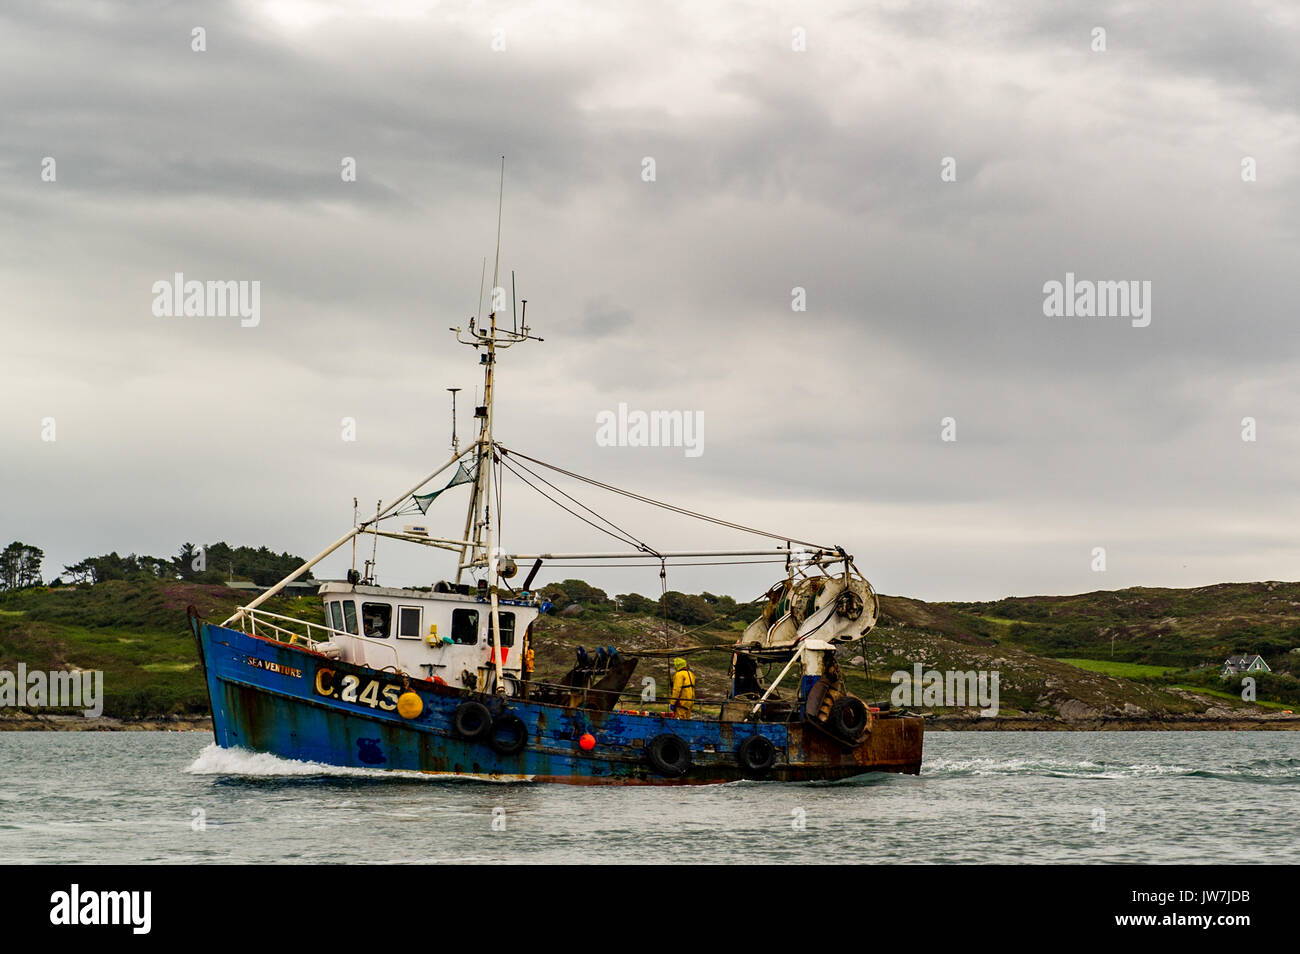 Irish Twin Rigger fishing trawler C.245 Sea Venture sails into Schull Harbour, West Cork, Ireland, with a load of fish to be unloaded. Stock Photo